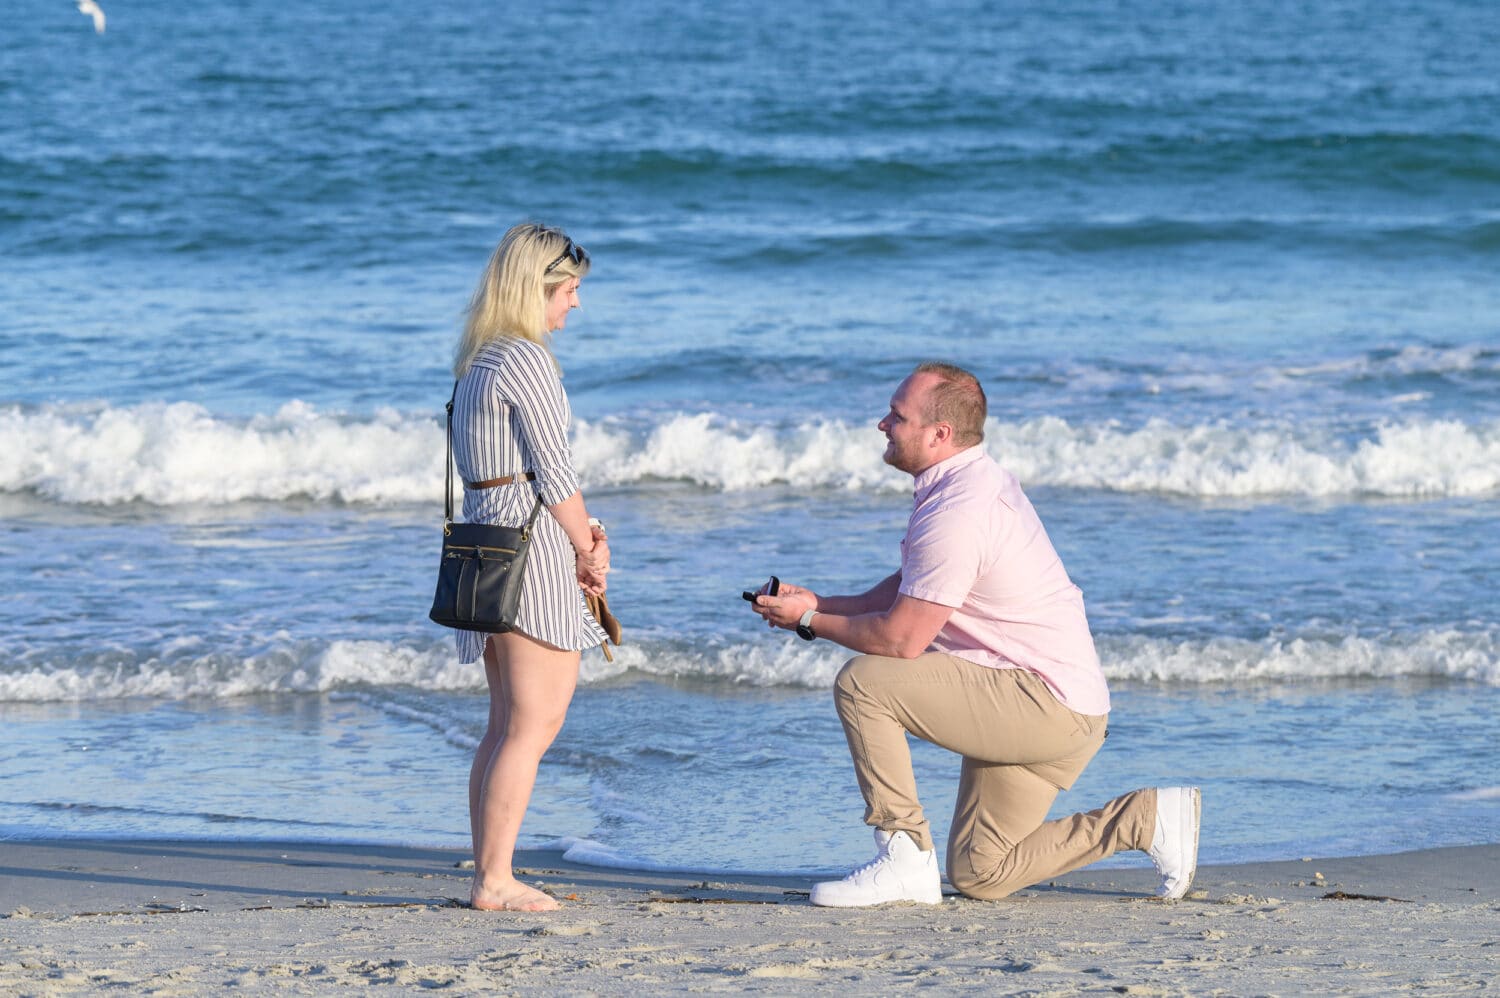 She said yes - Myrtle Beach State Park